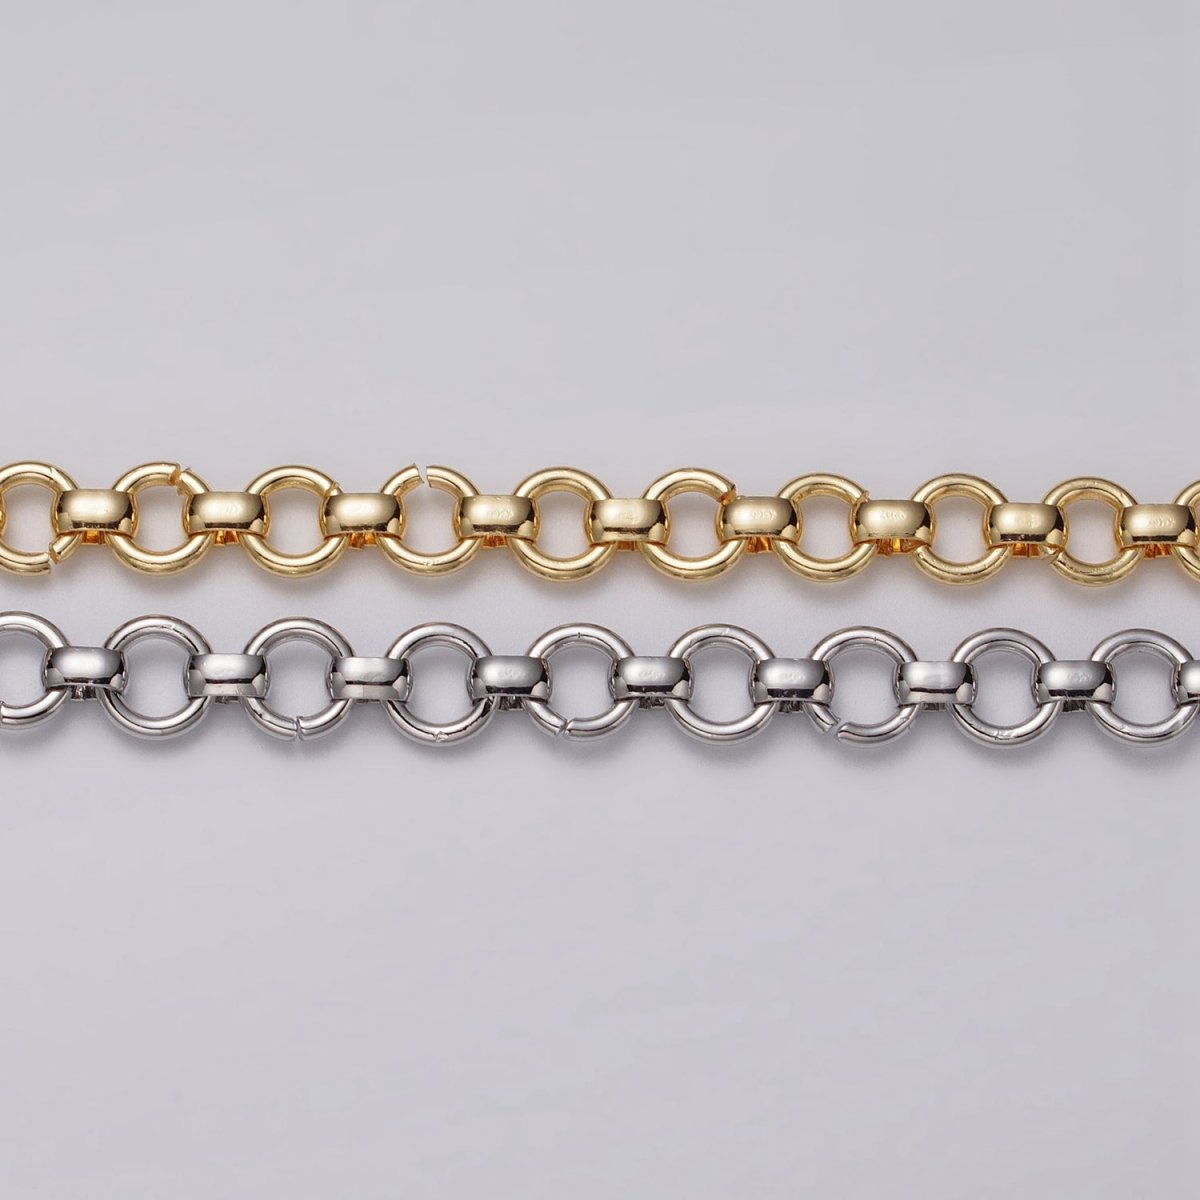 24k Gold Filled 7.5mm Round Rolo Unfinished Chain by Yard in Gold & Silver | ROLL-1147 ROLL-1148 Clearance Pricing - DLUXCA